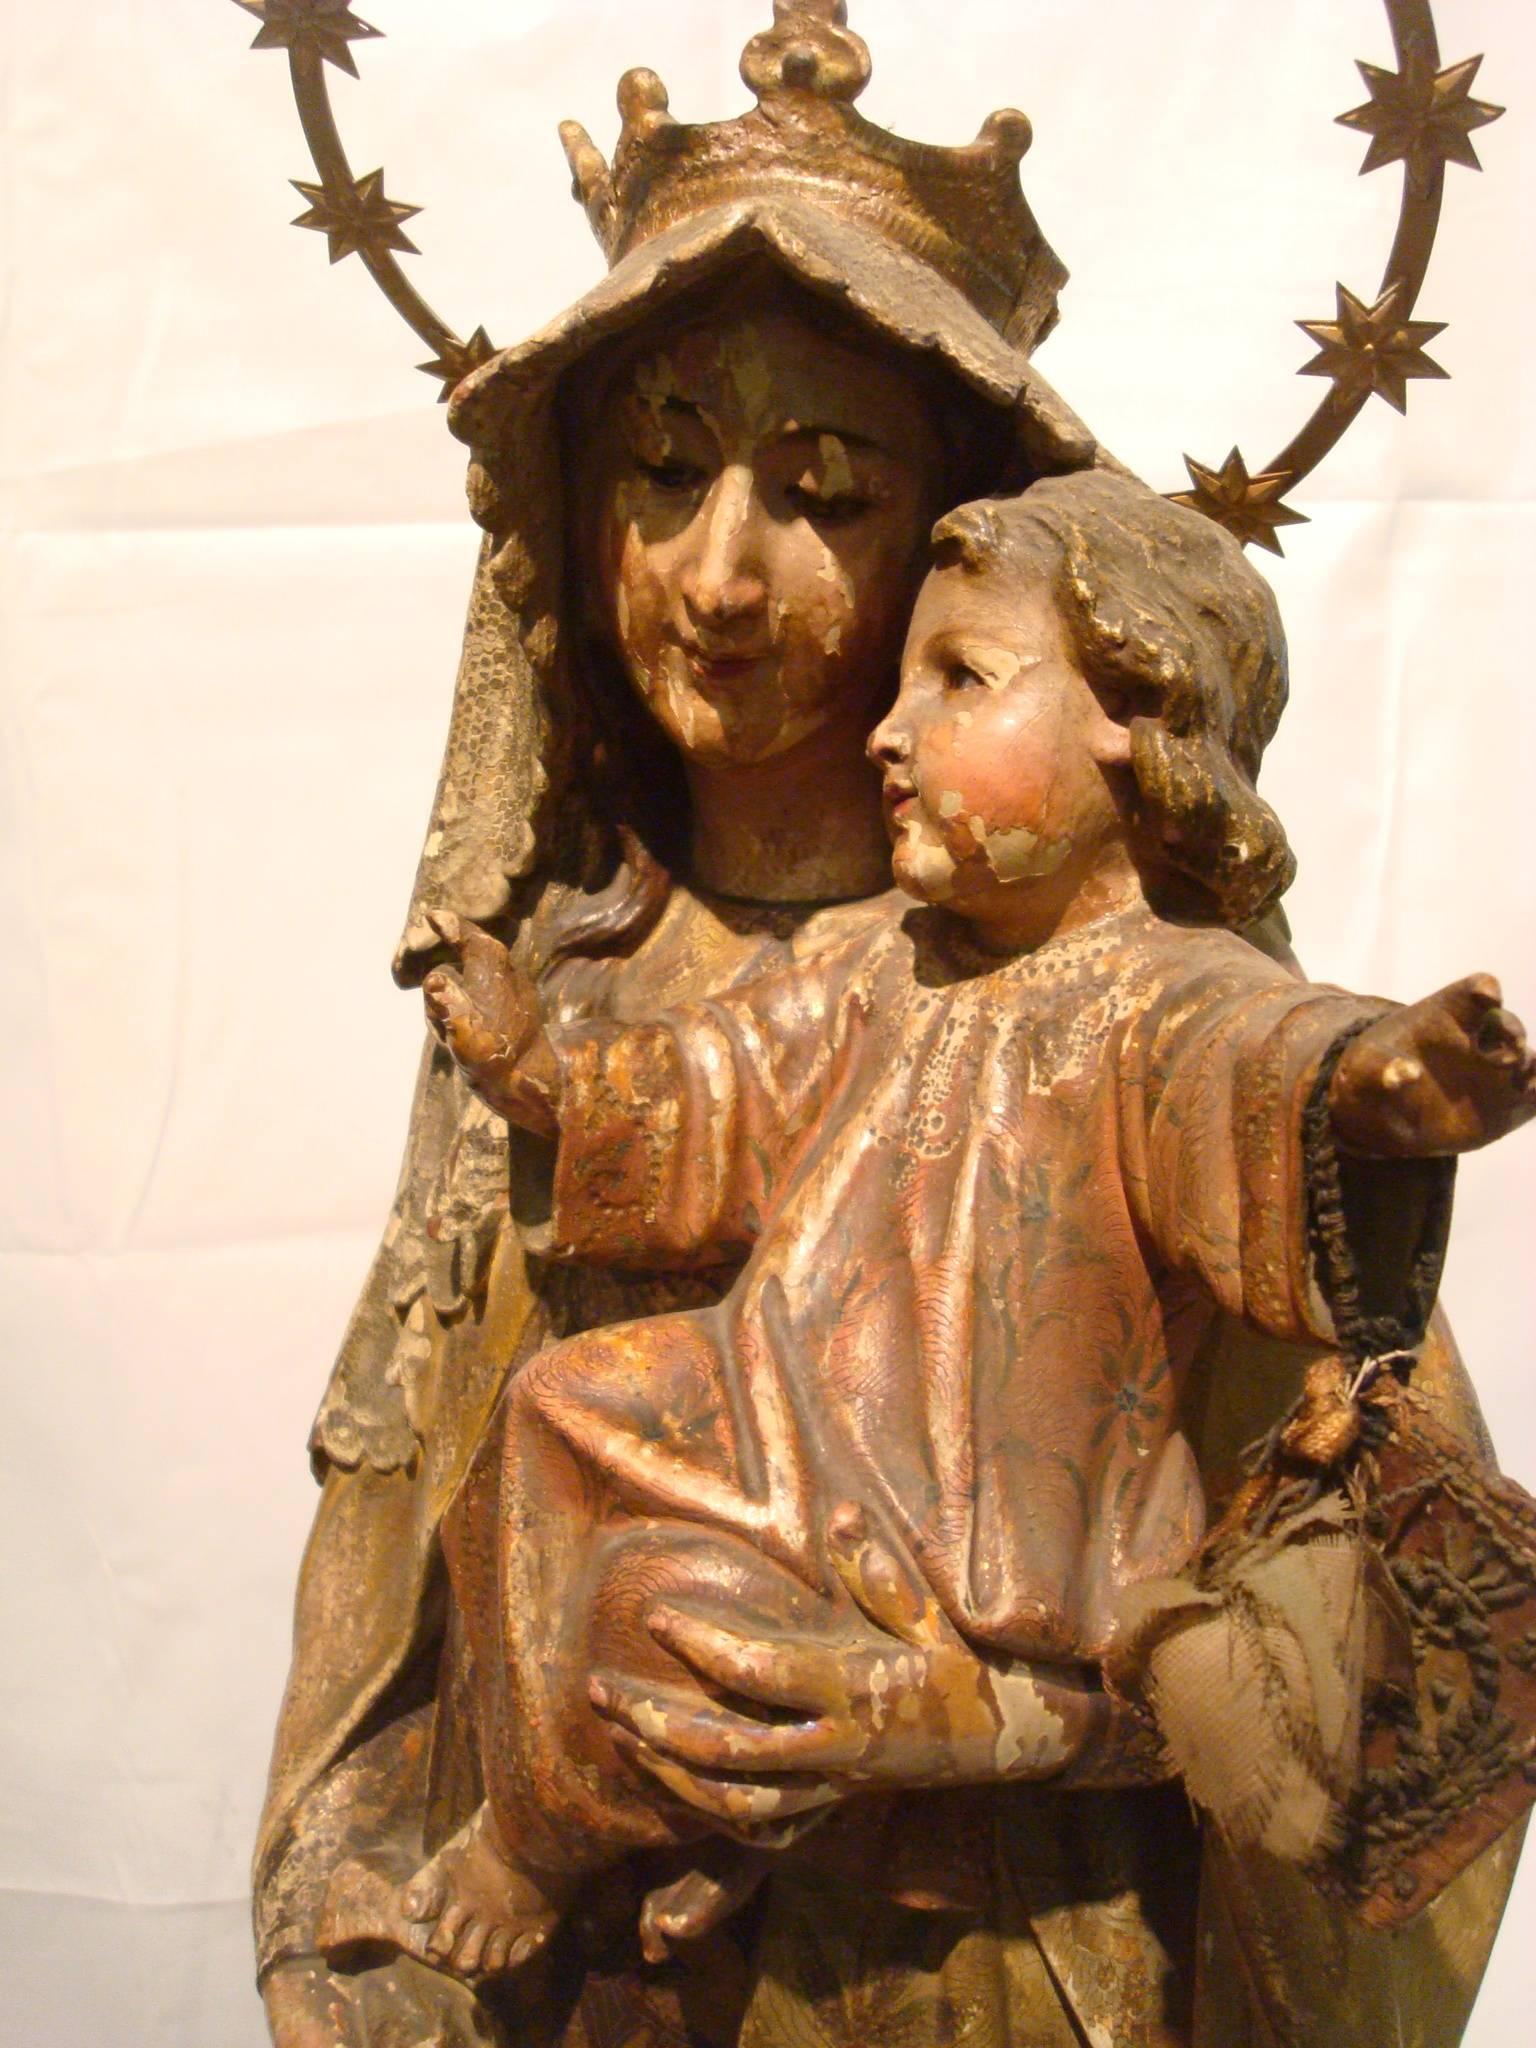 Polychromed 19th C. Wooden Sculpture Virgin Mary with Jesus - Wood Carved Polychrome Figure